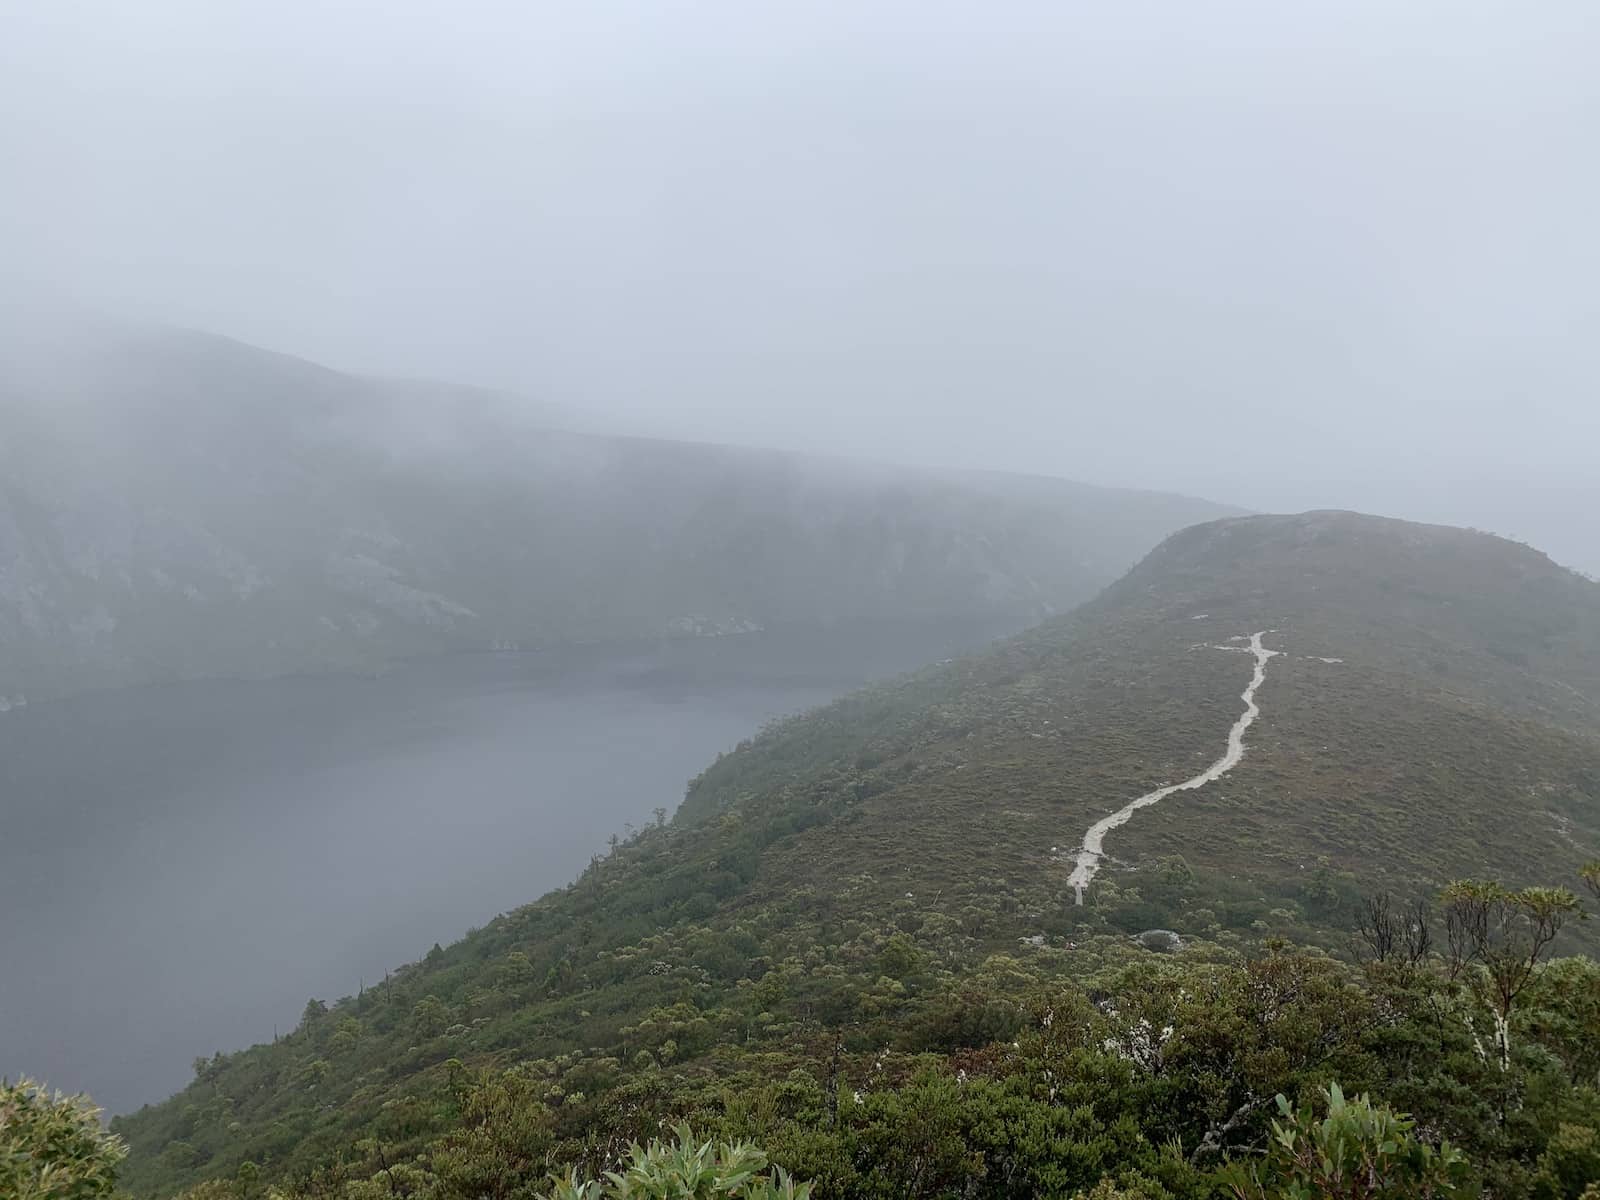 A view downwards from a mountain, showing a thin trail leading into the distance. It is a very cloudy day